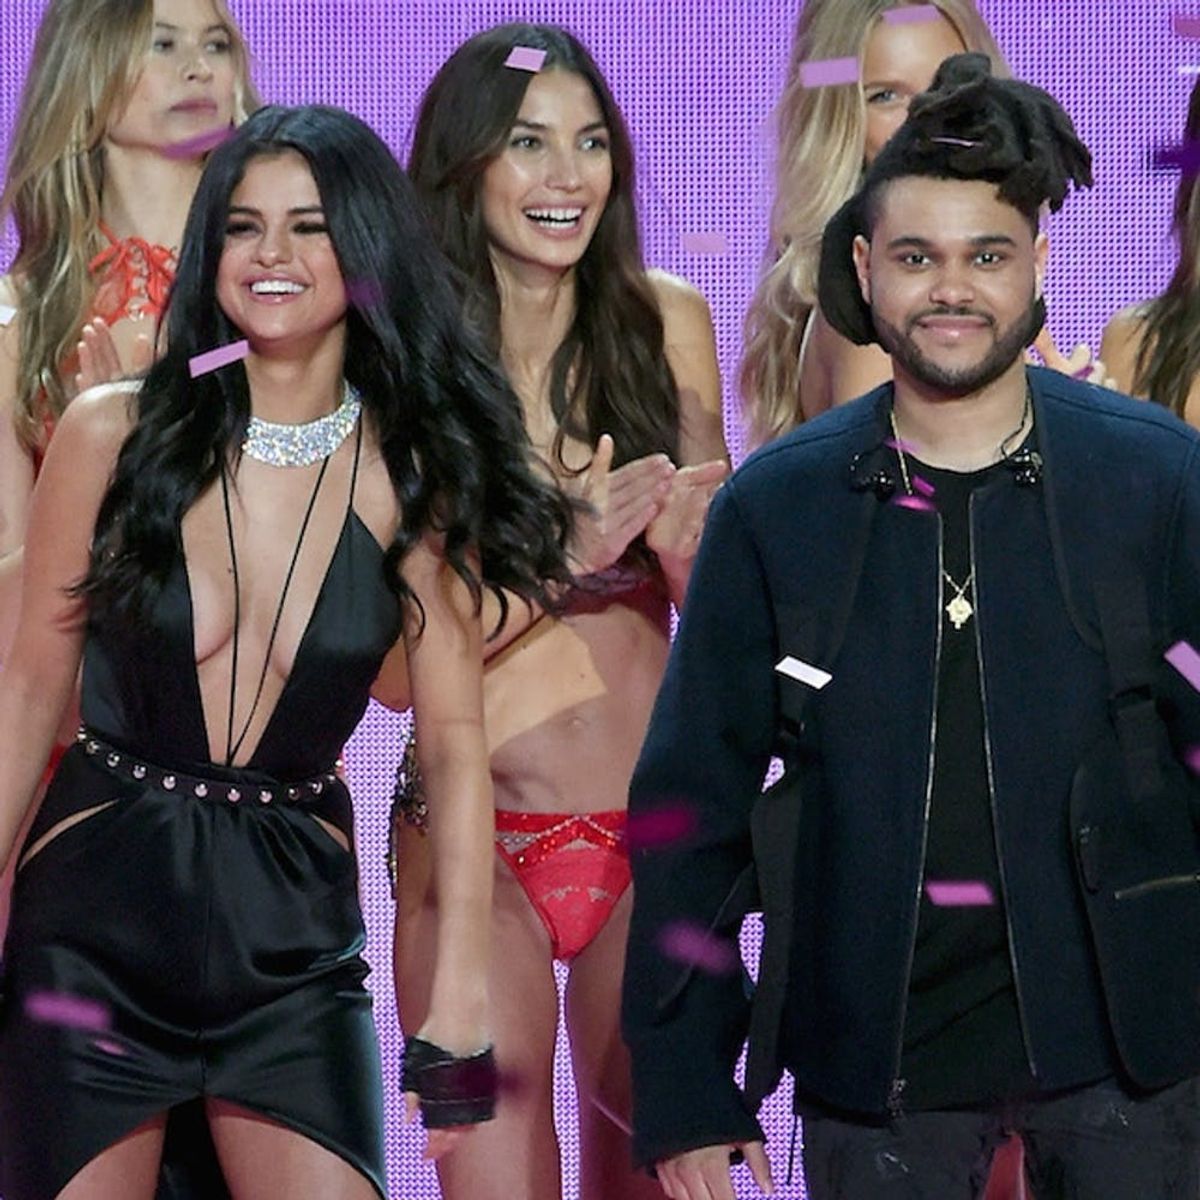 People Think This Pic of Selena Gomez’s Parents Looks JUST Like Her and The Weeknd